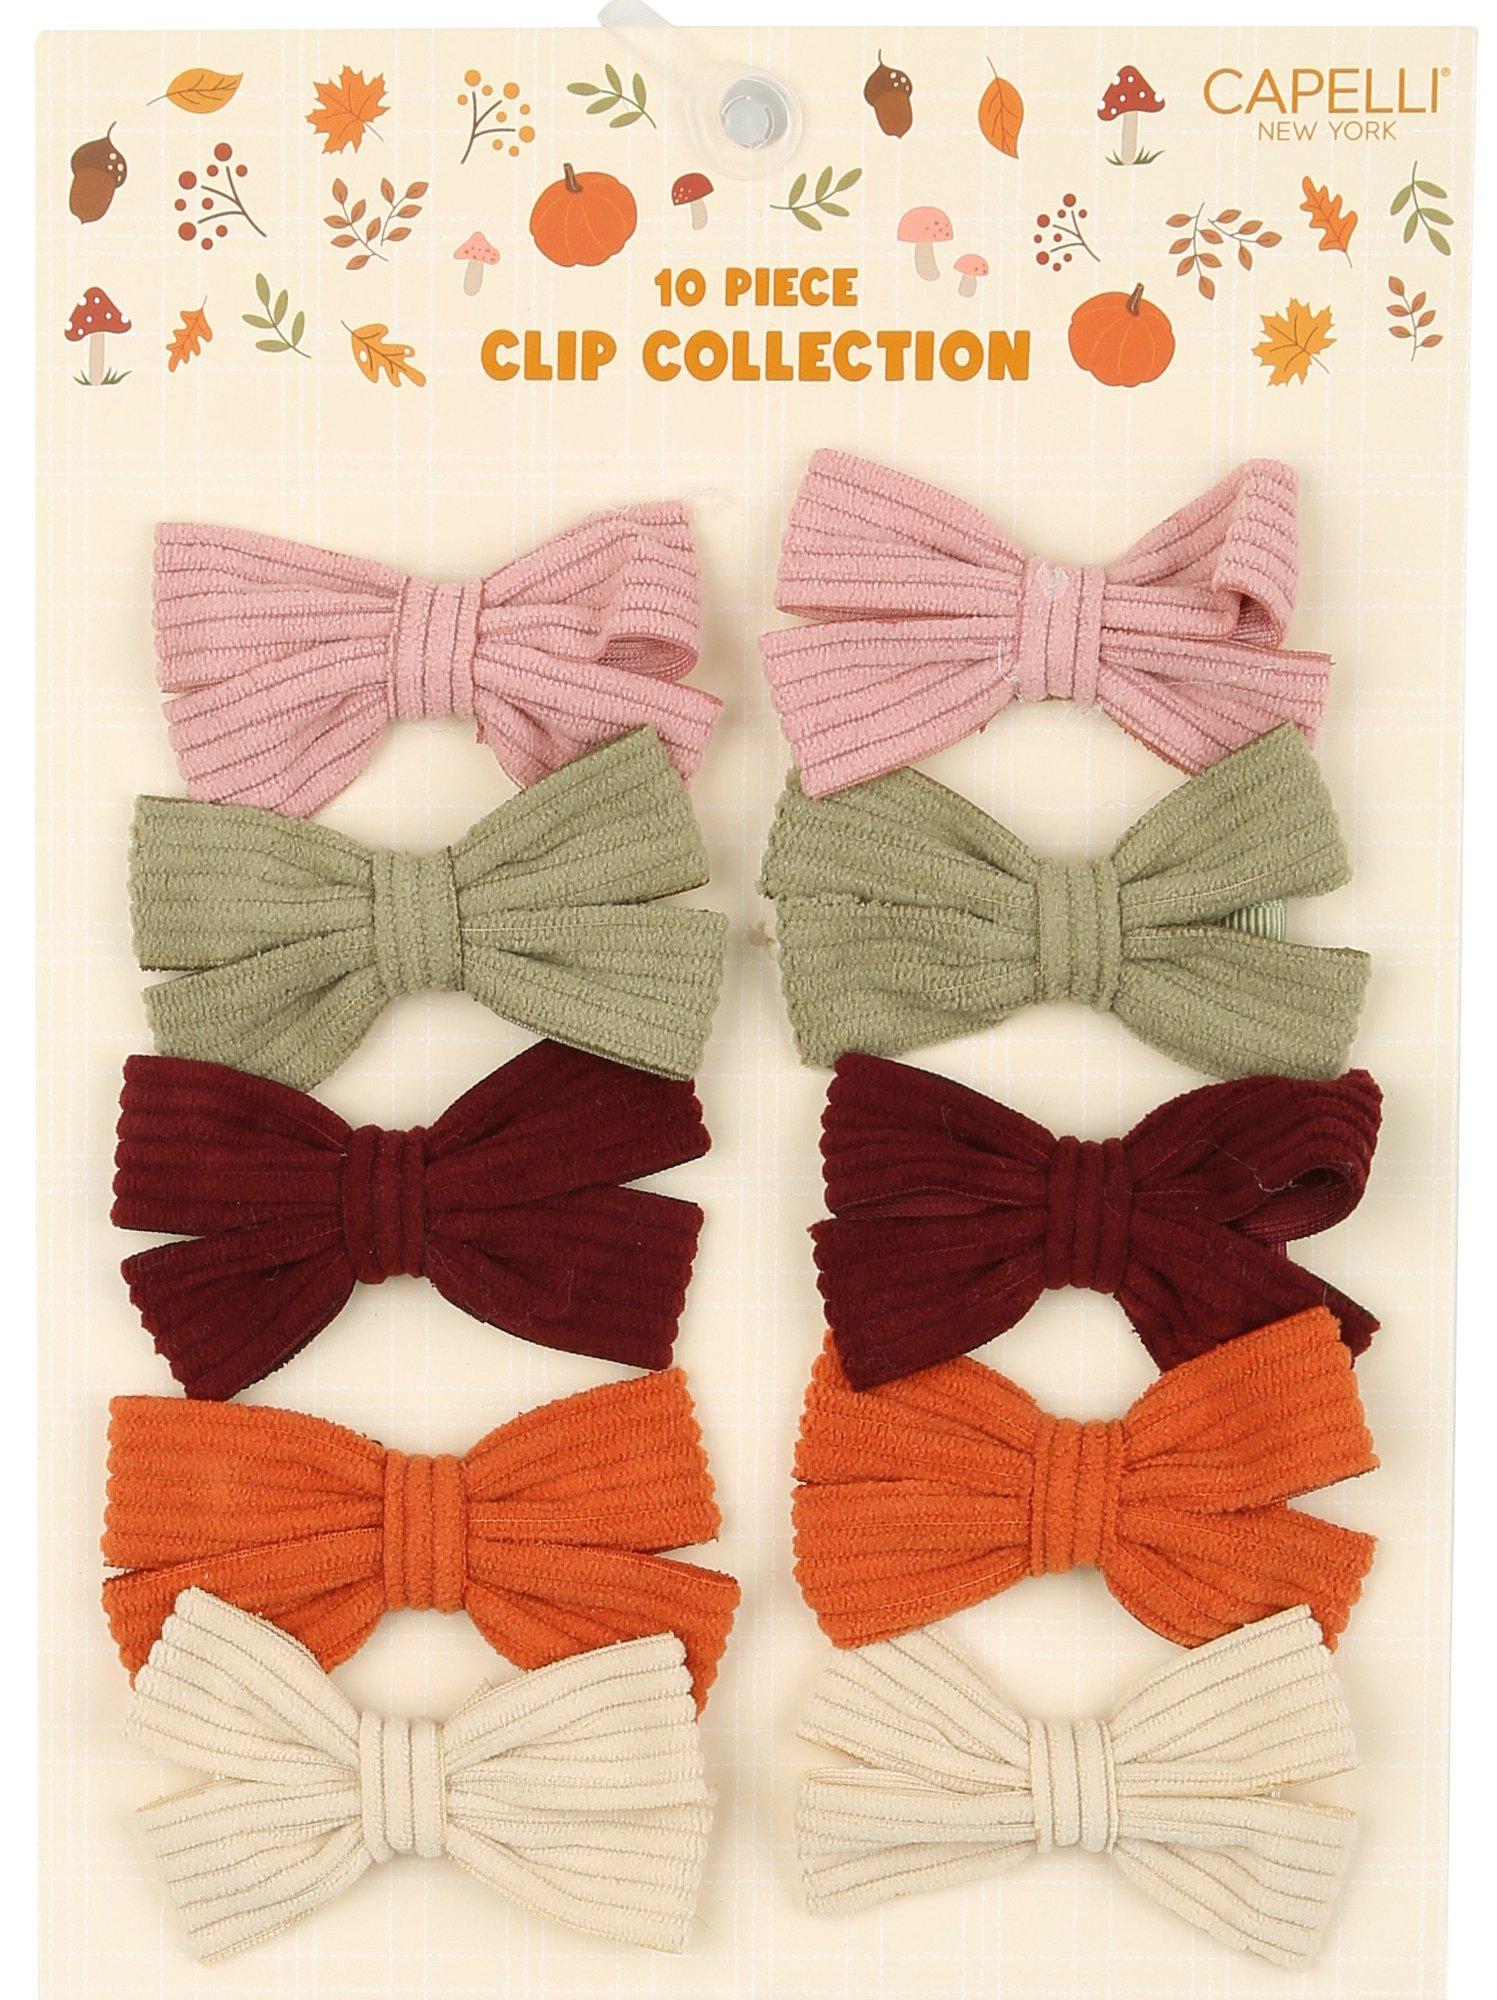 Capelli New York 10-pk. Harvest Bow Hair Clip Collection